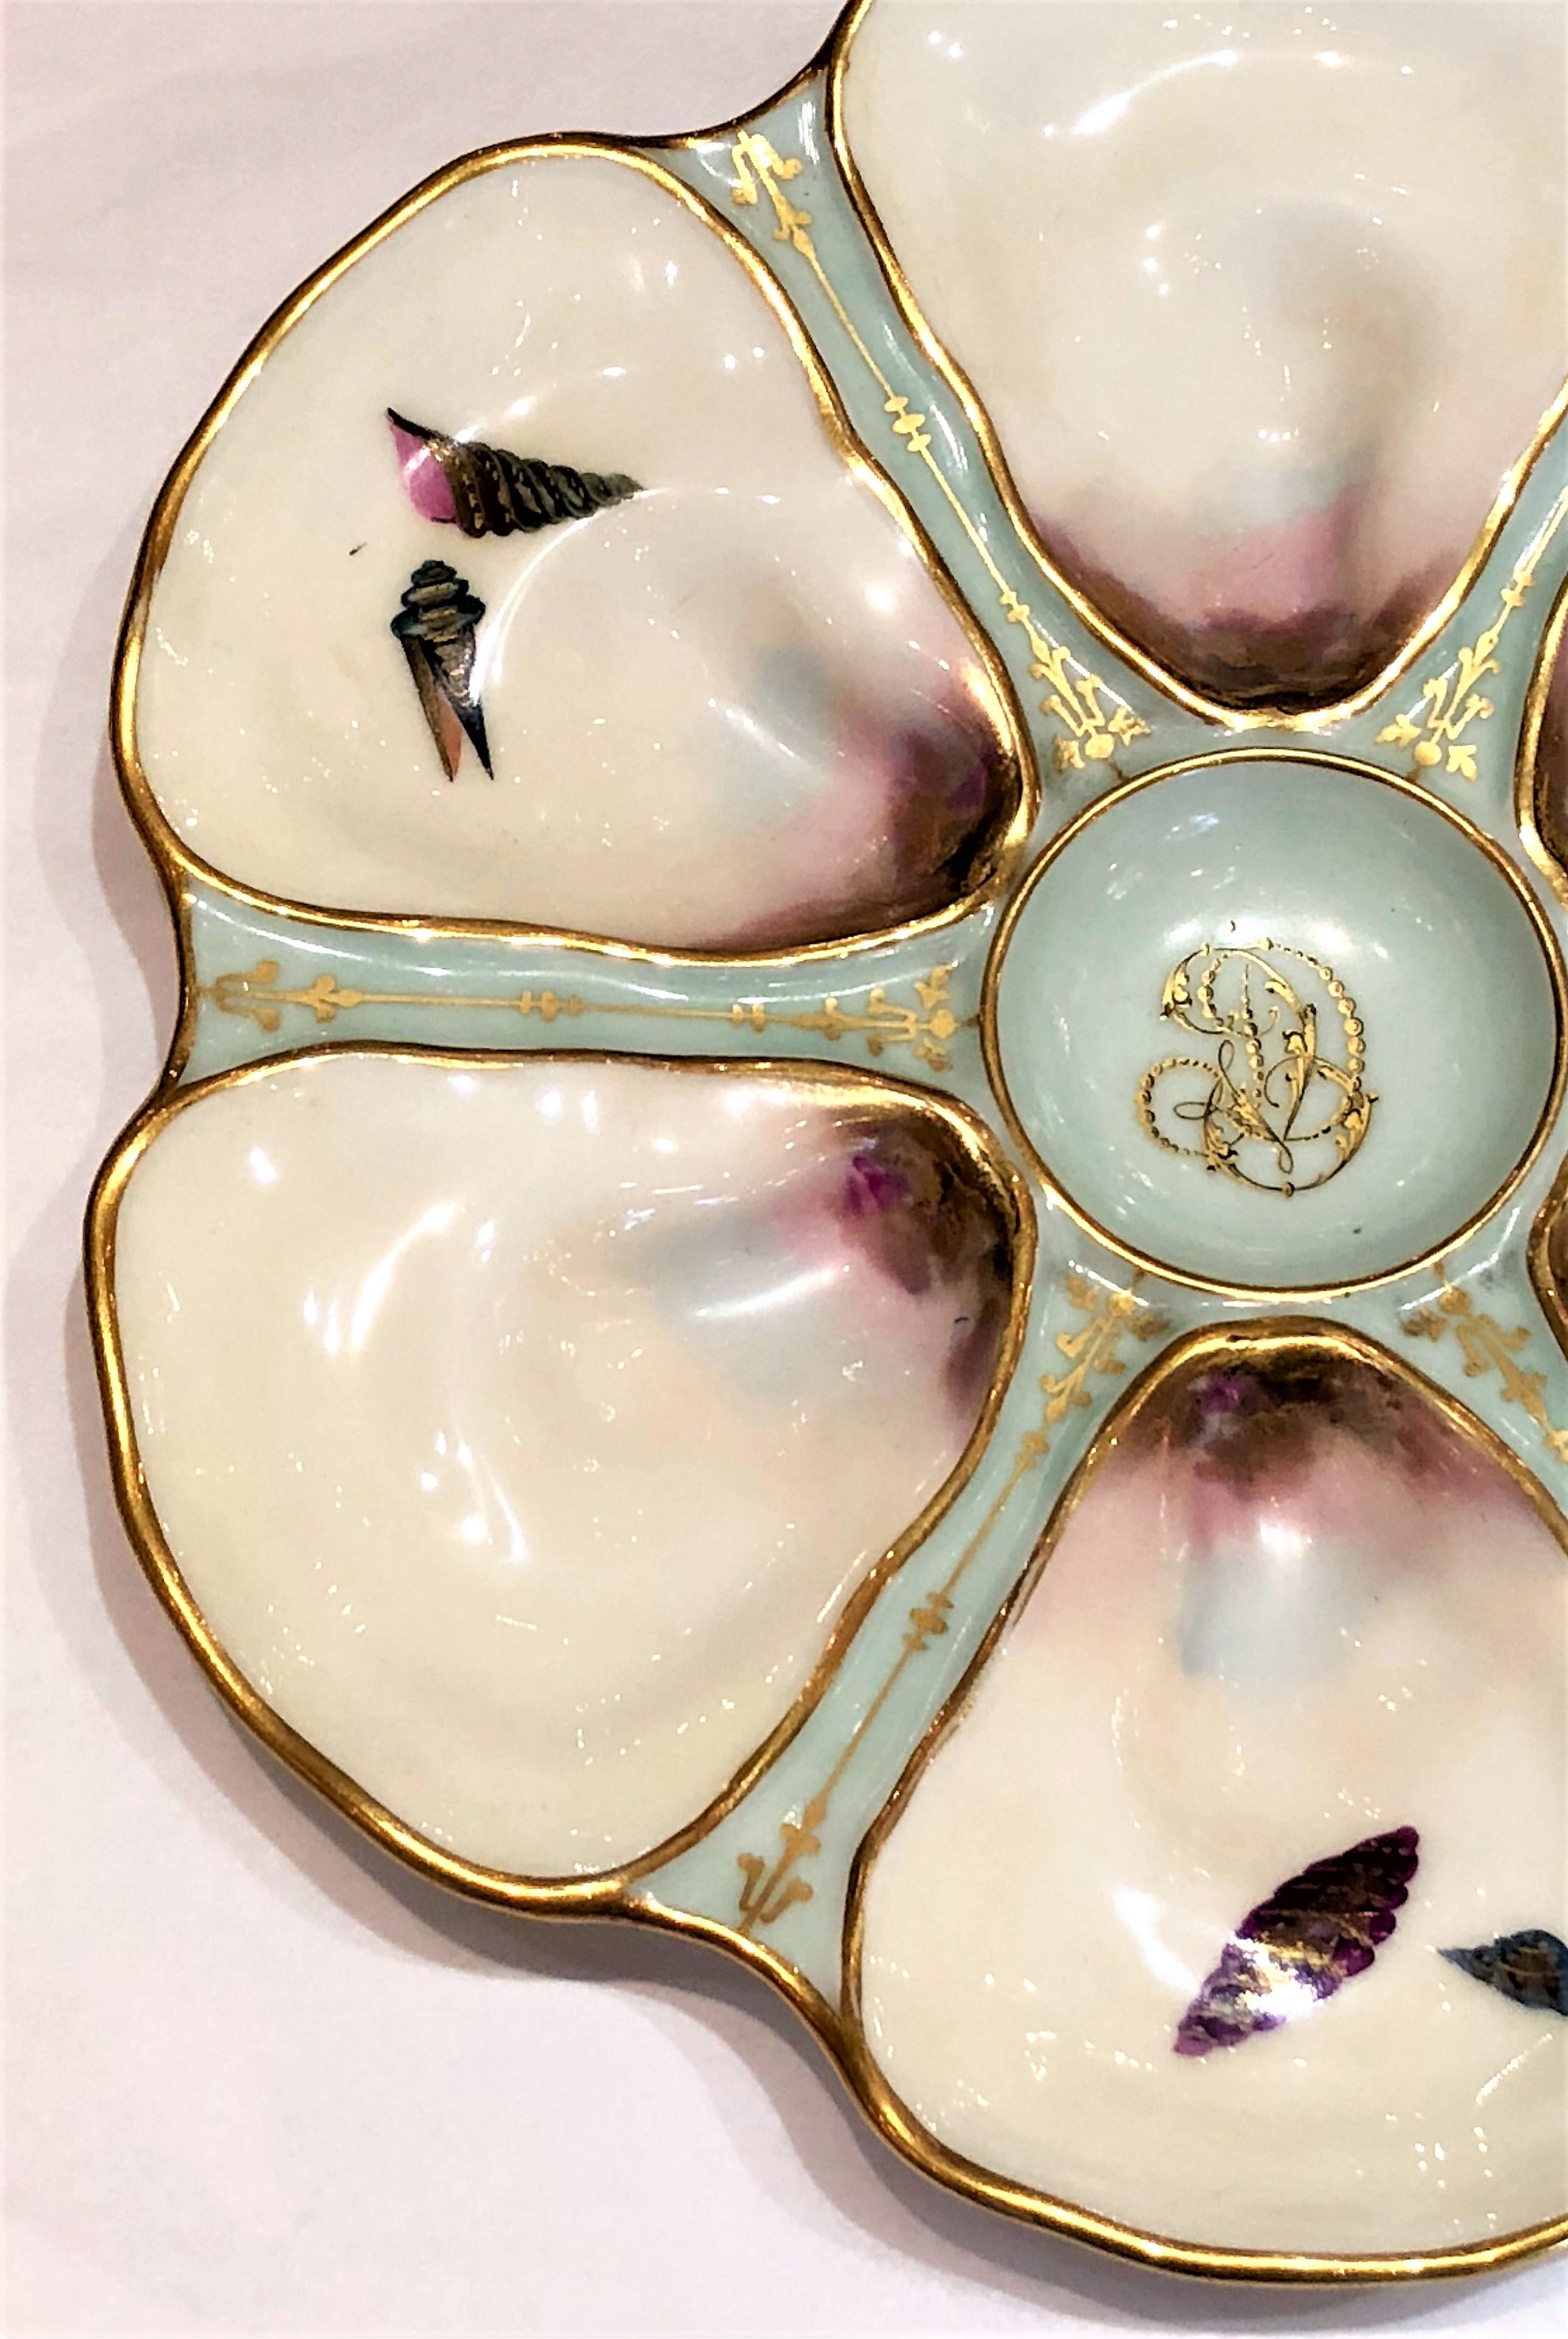 Antique French Limoges hand-painted porcelain oyster plate, circa 1900.